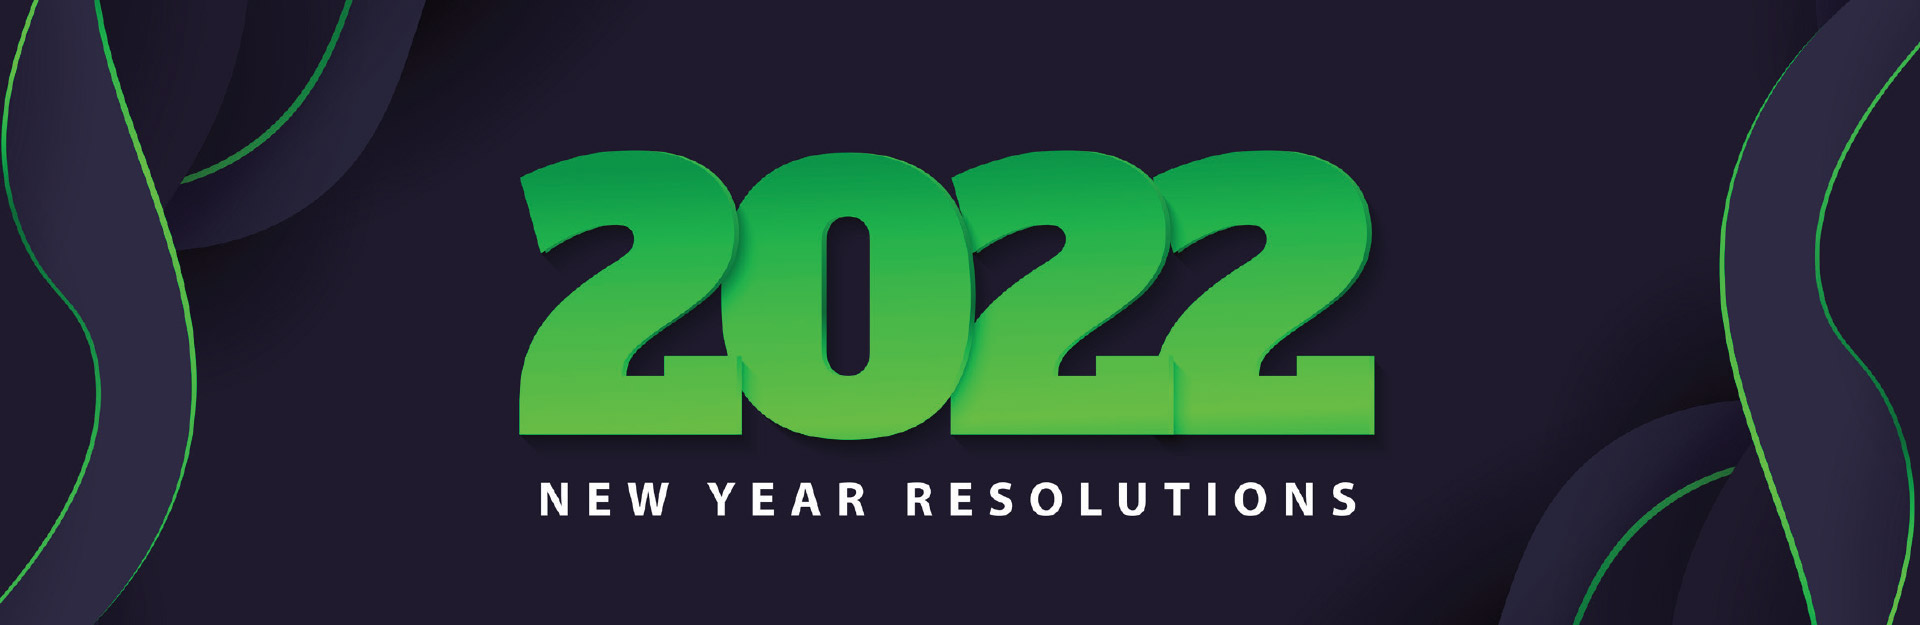 2022 New Year Resolutions